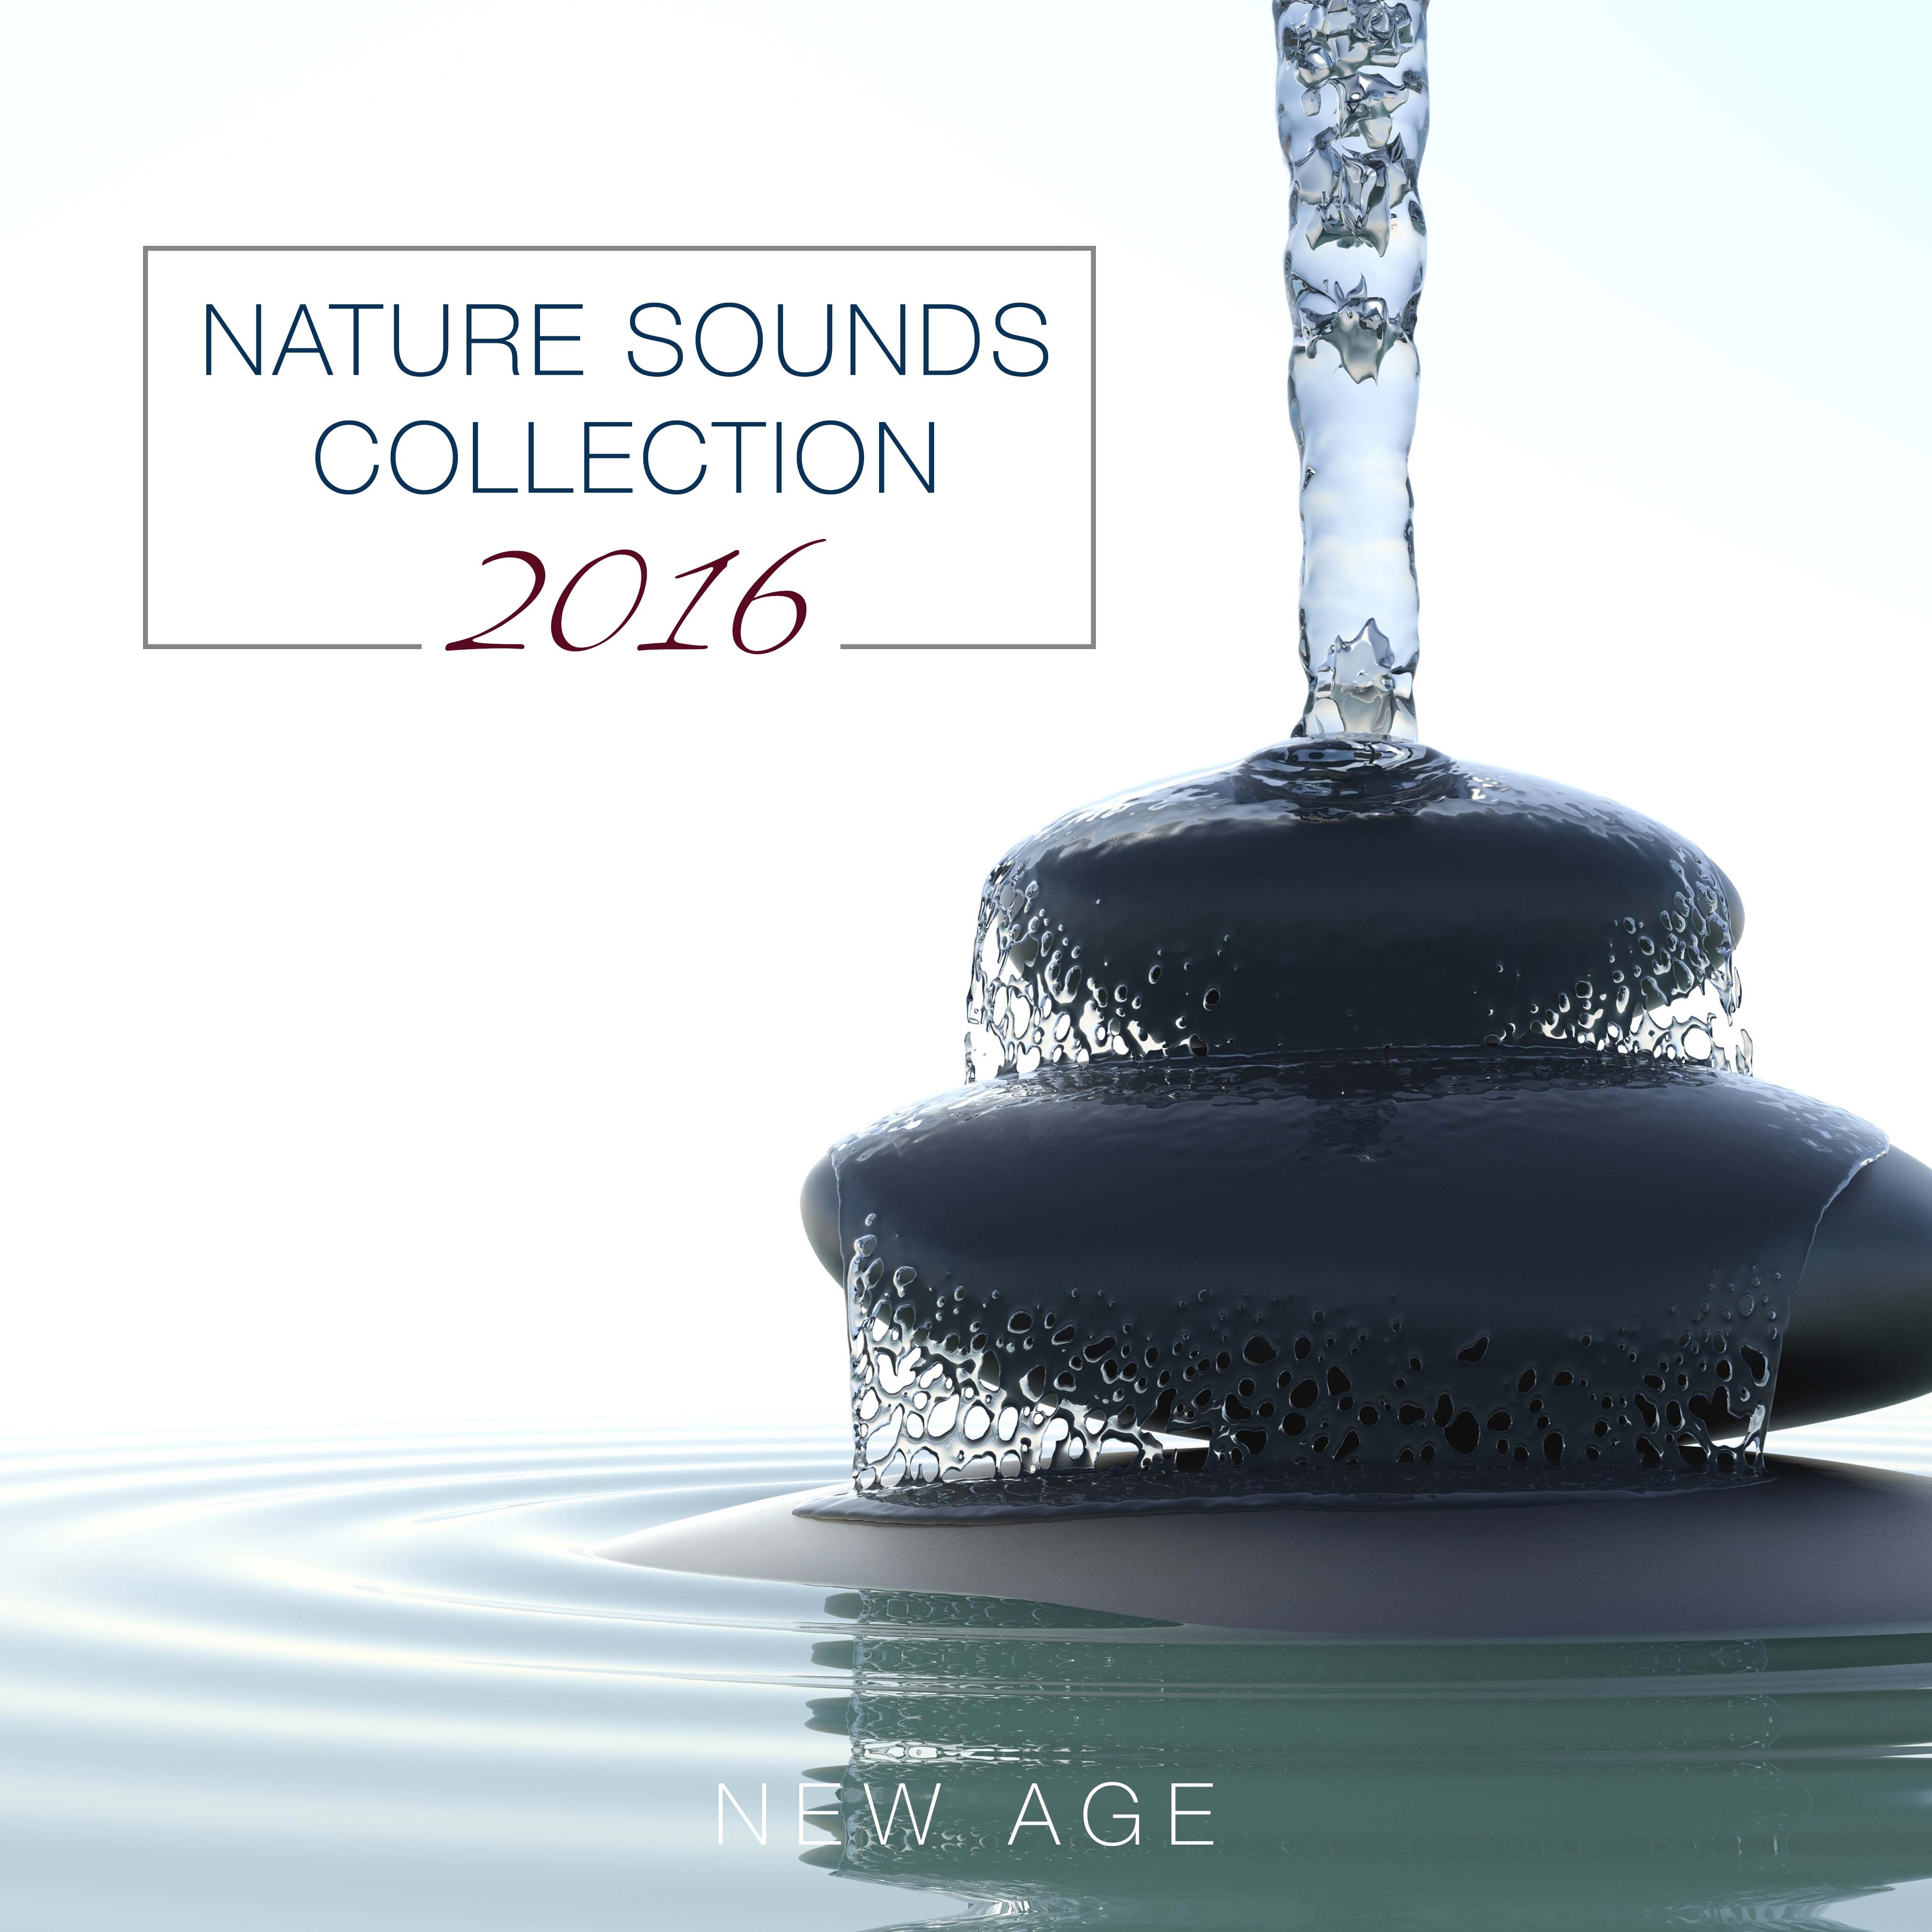 Nature Sounds Collection 2016